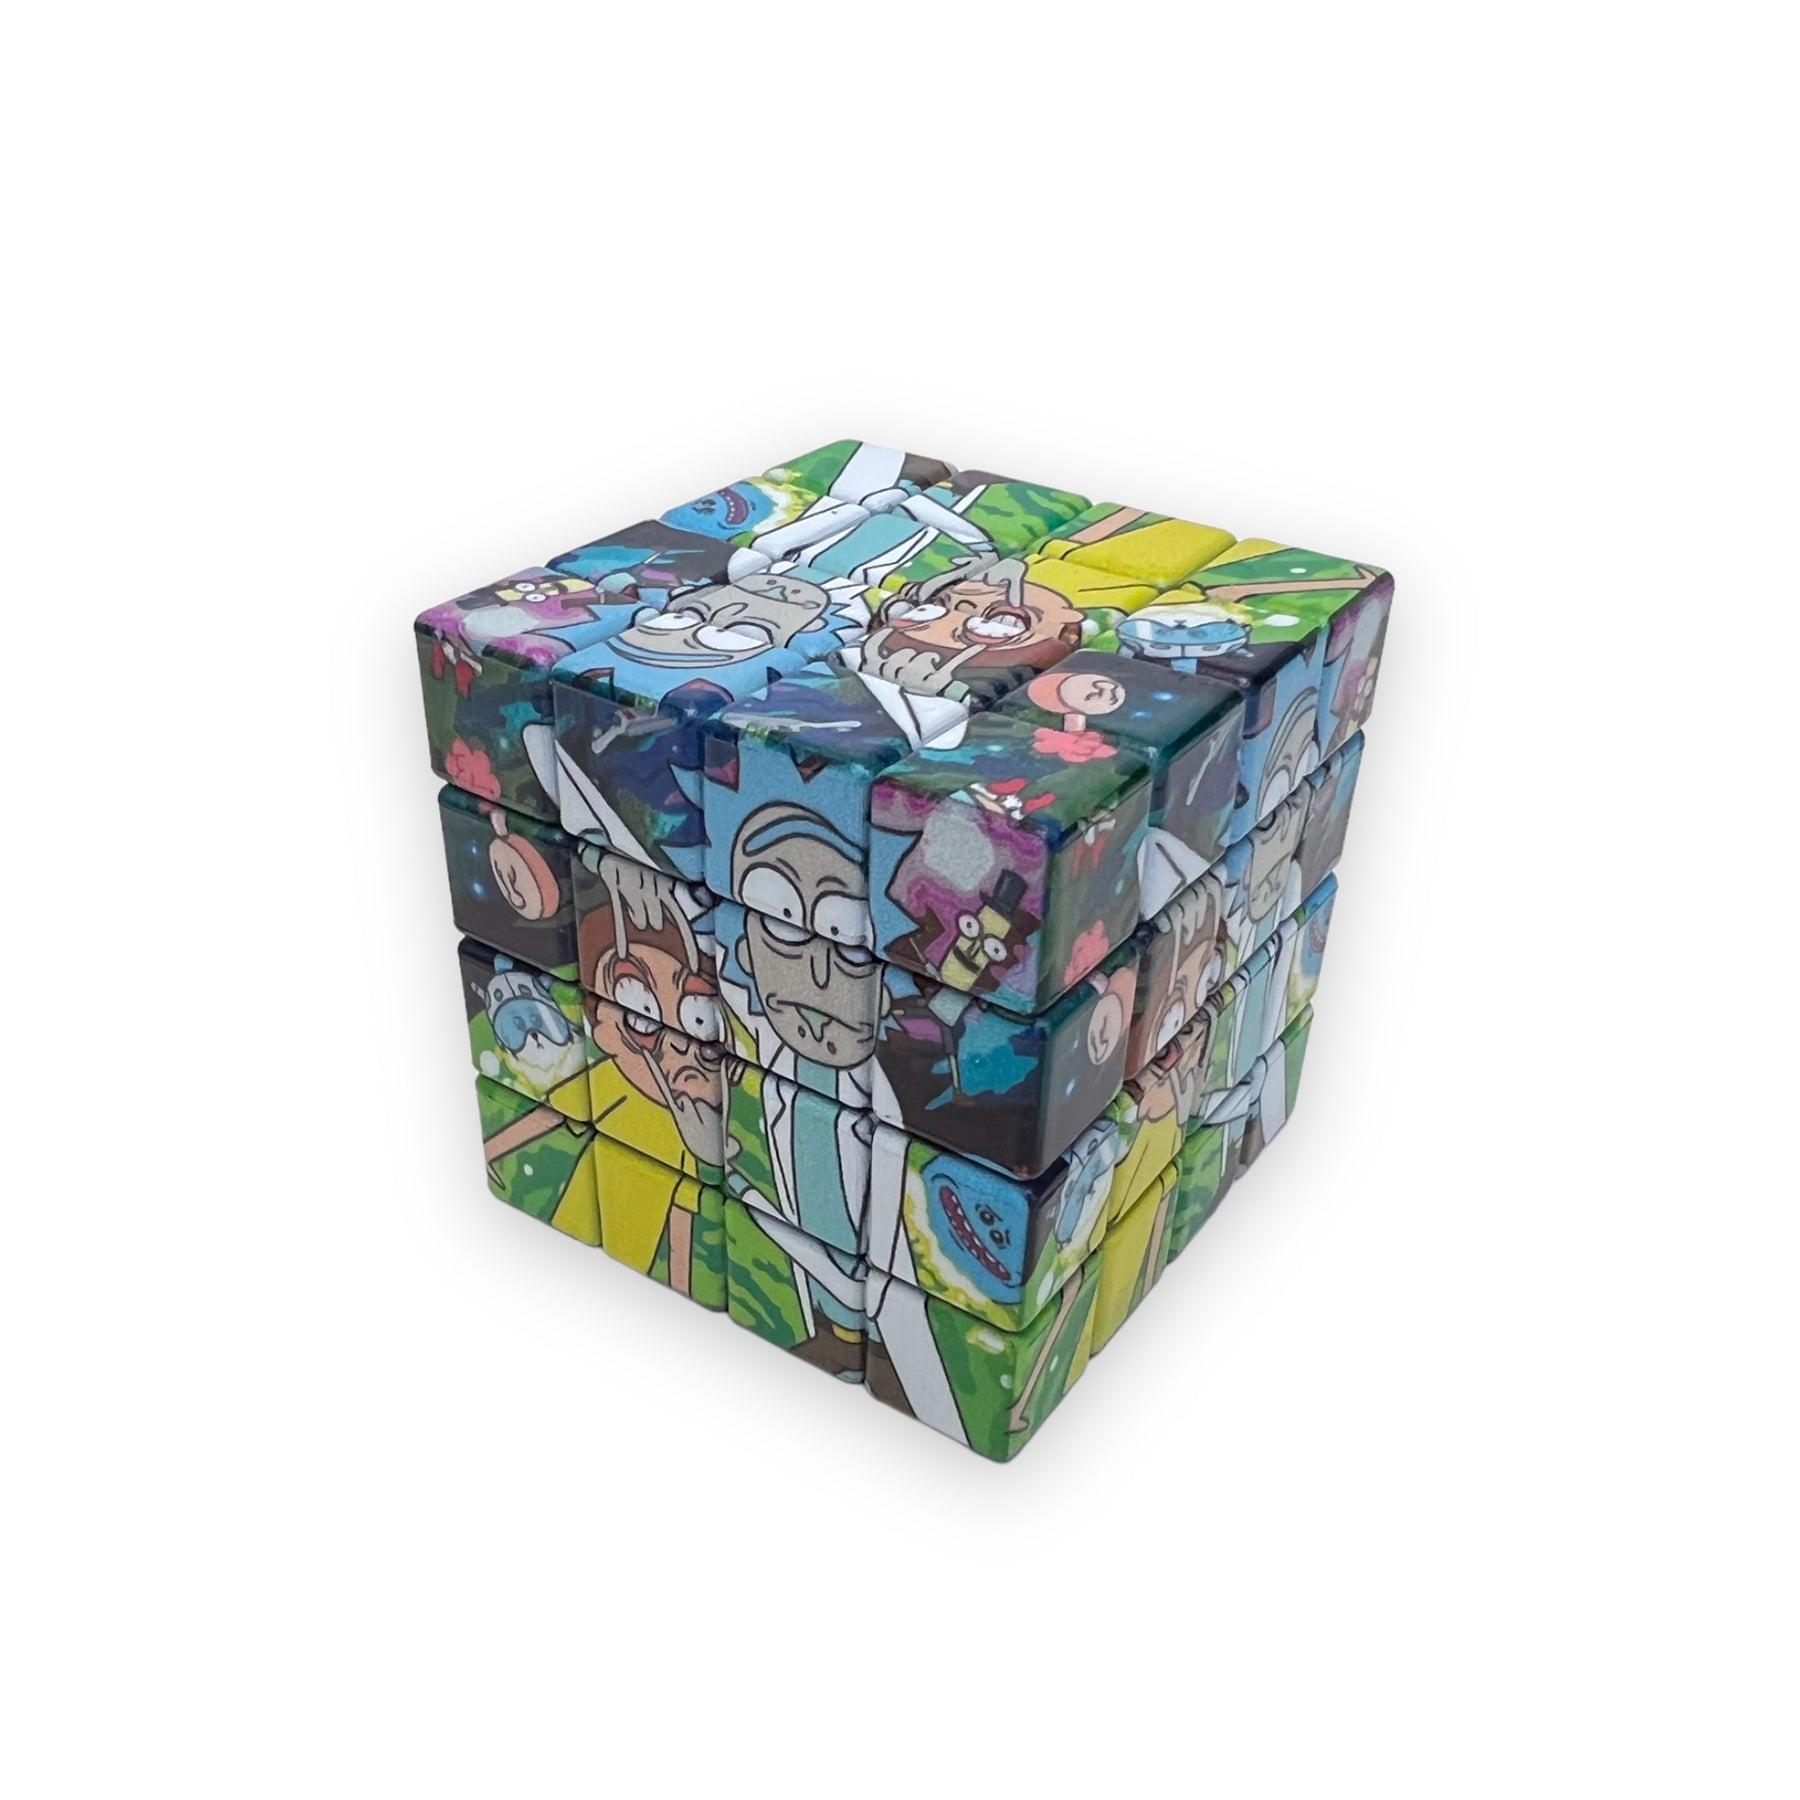 Rick and Morty Rubik's Cube Grinder from Angle